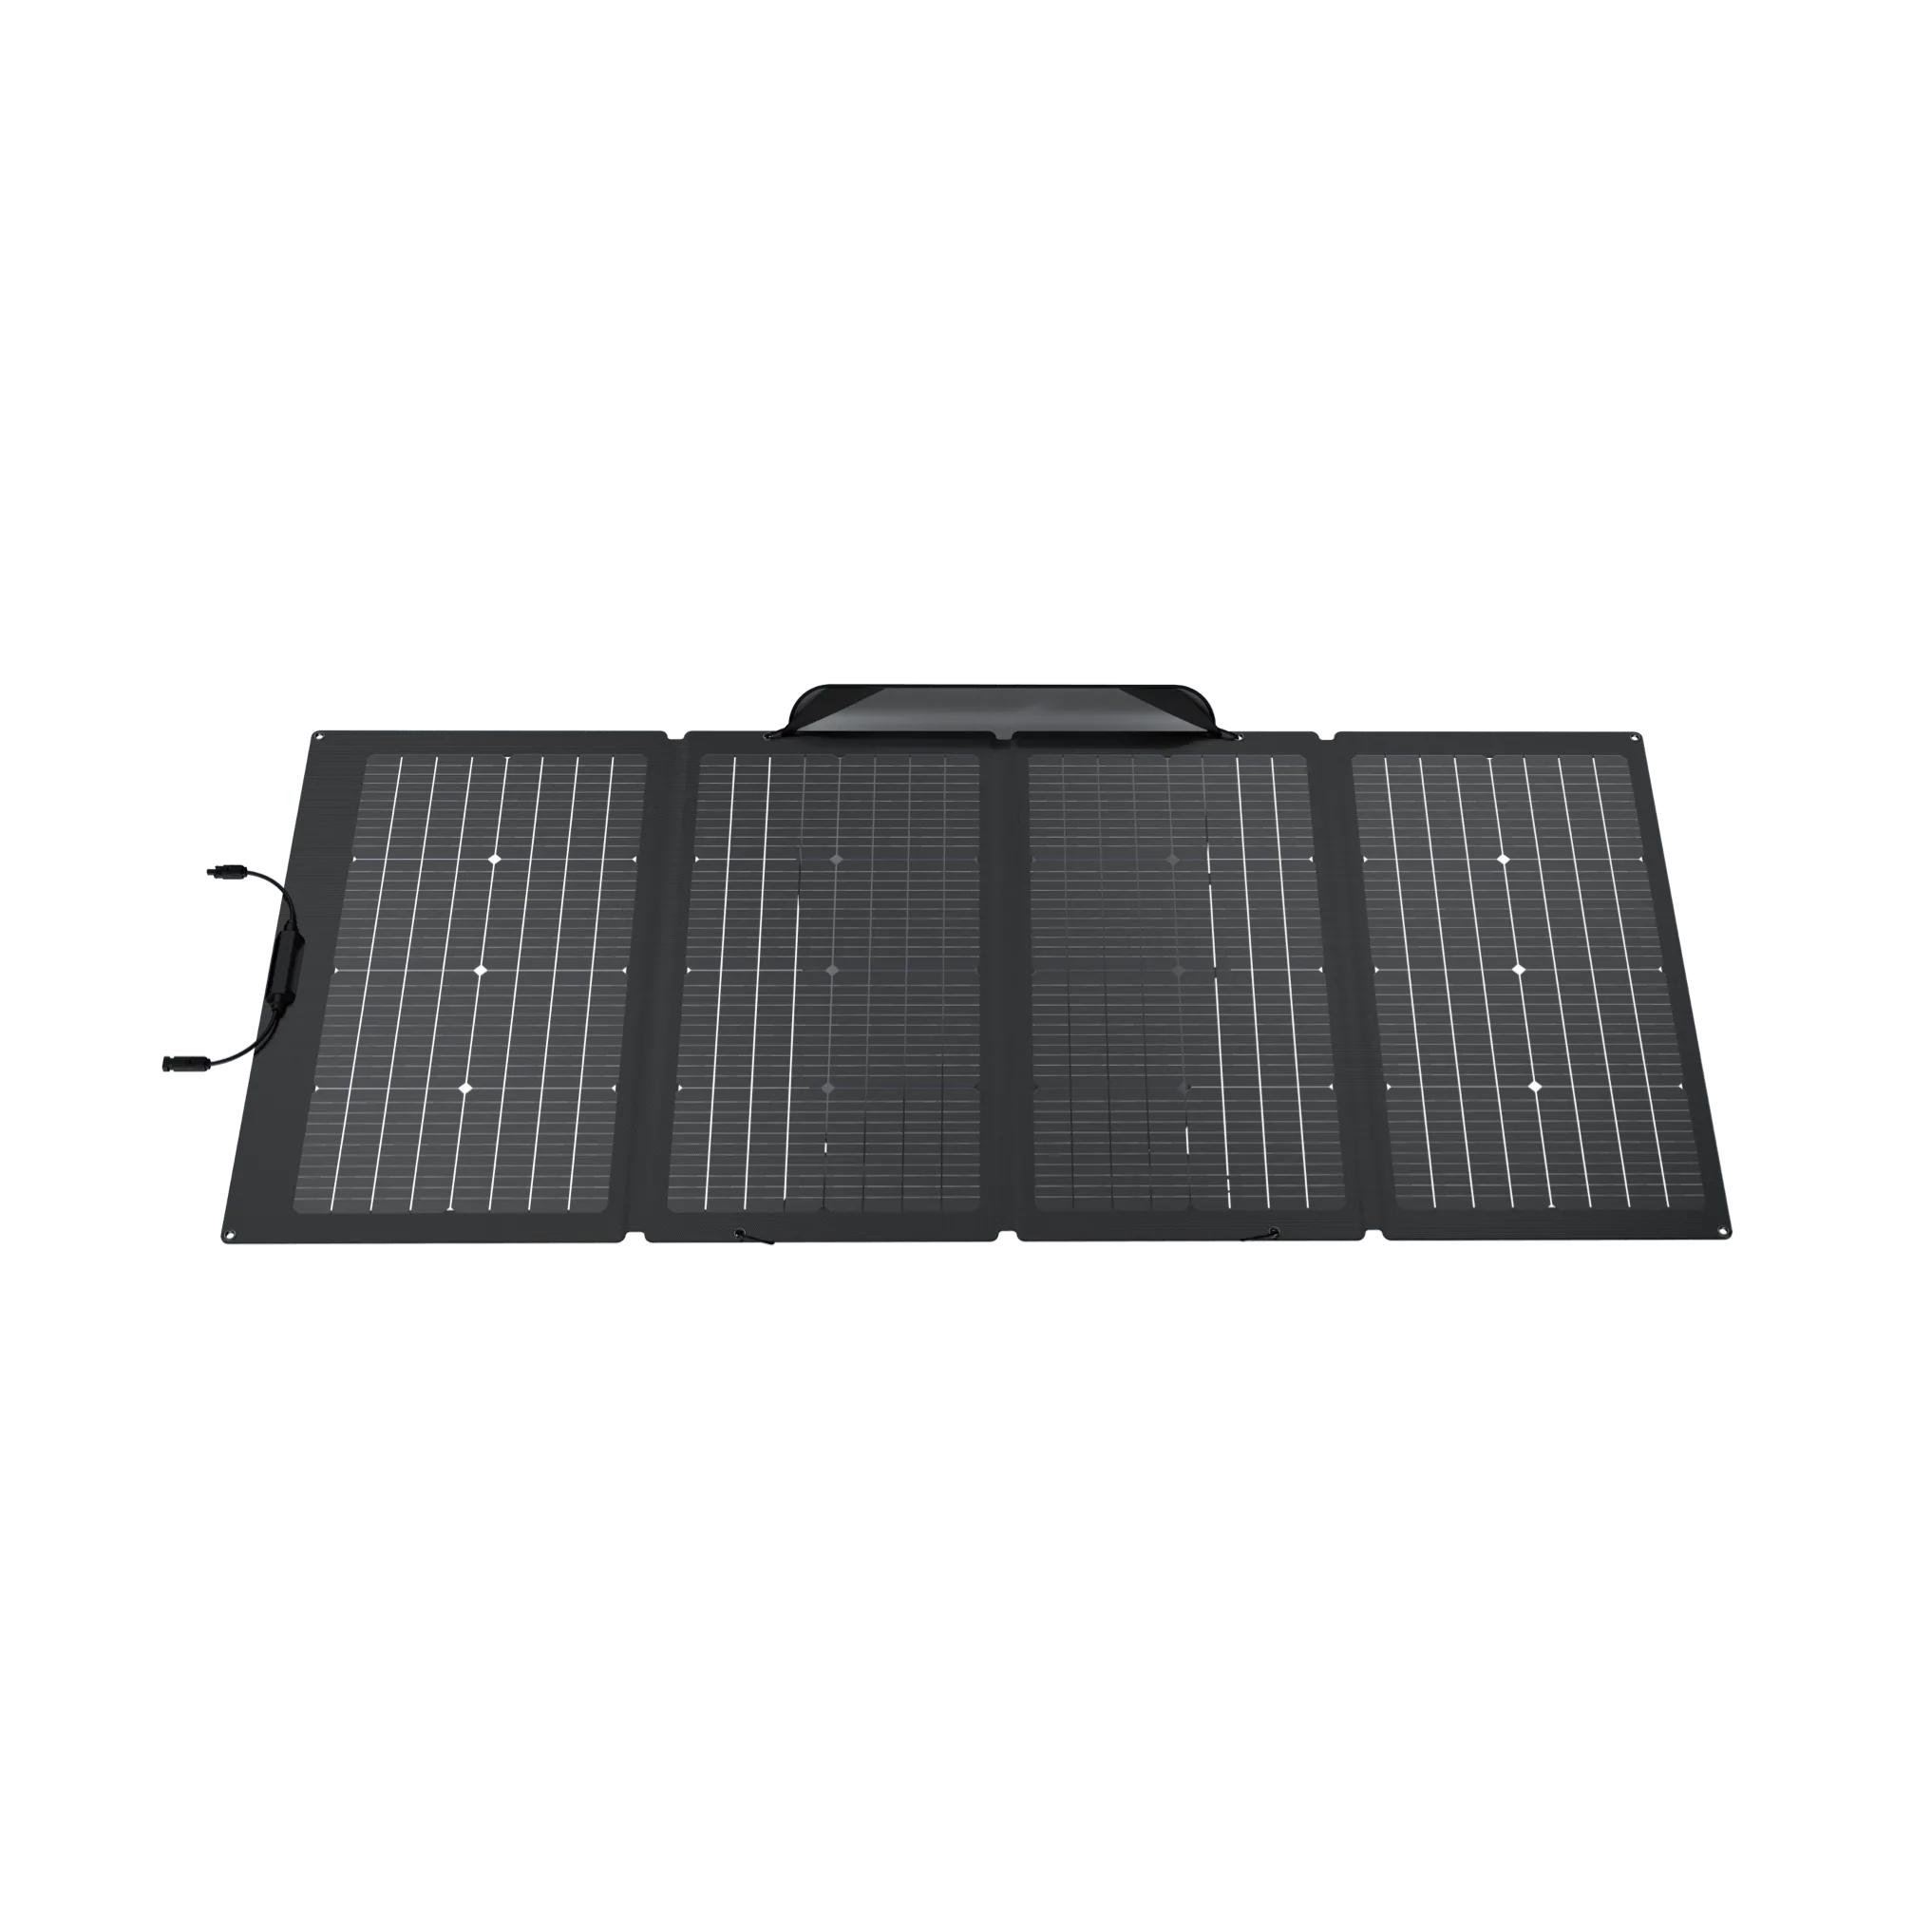 A portable solar panel with front and rear bifacial technology and a black design.